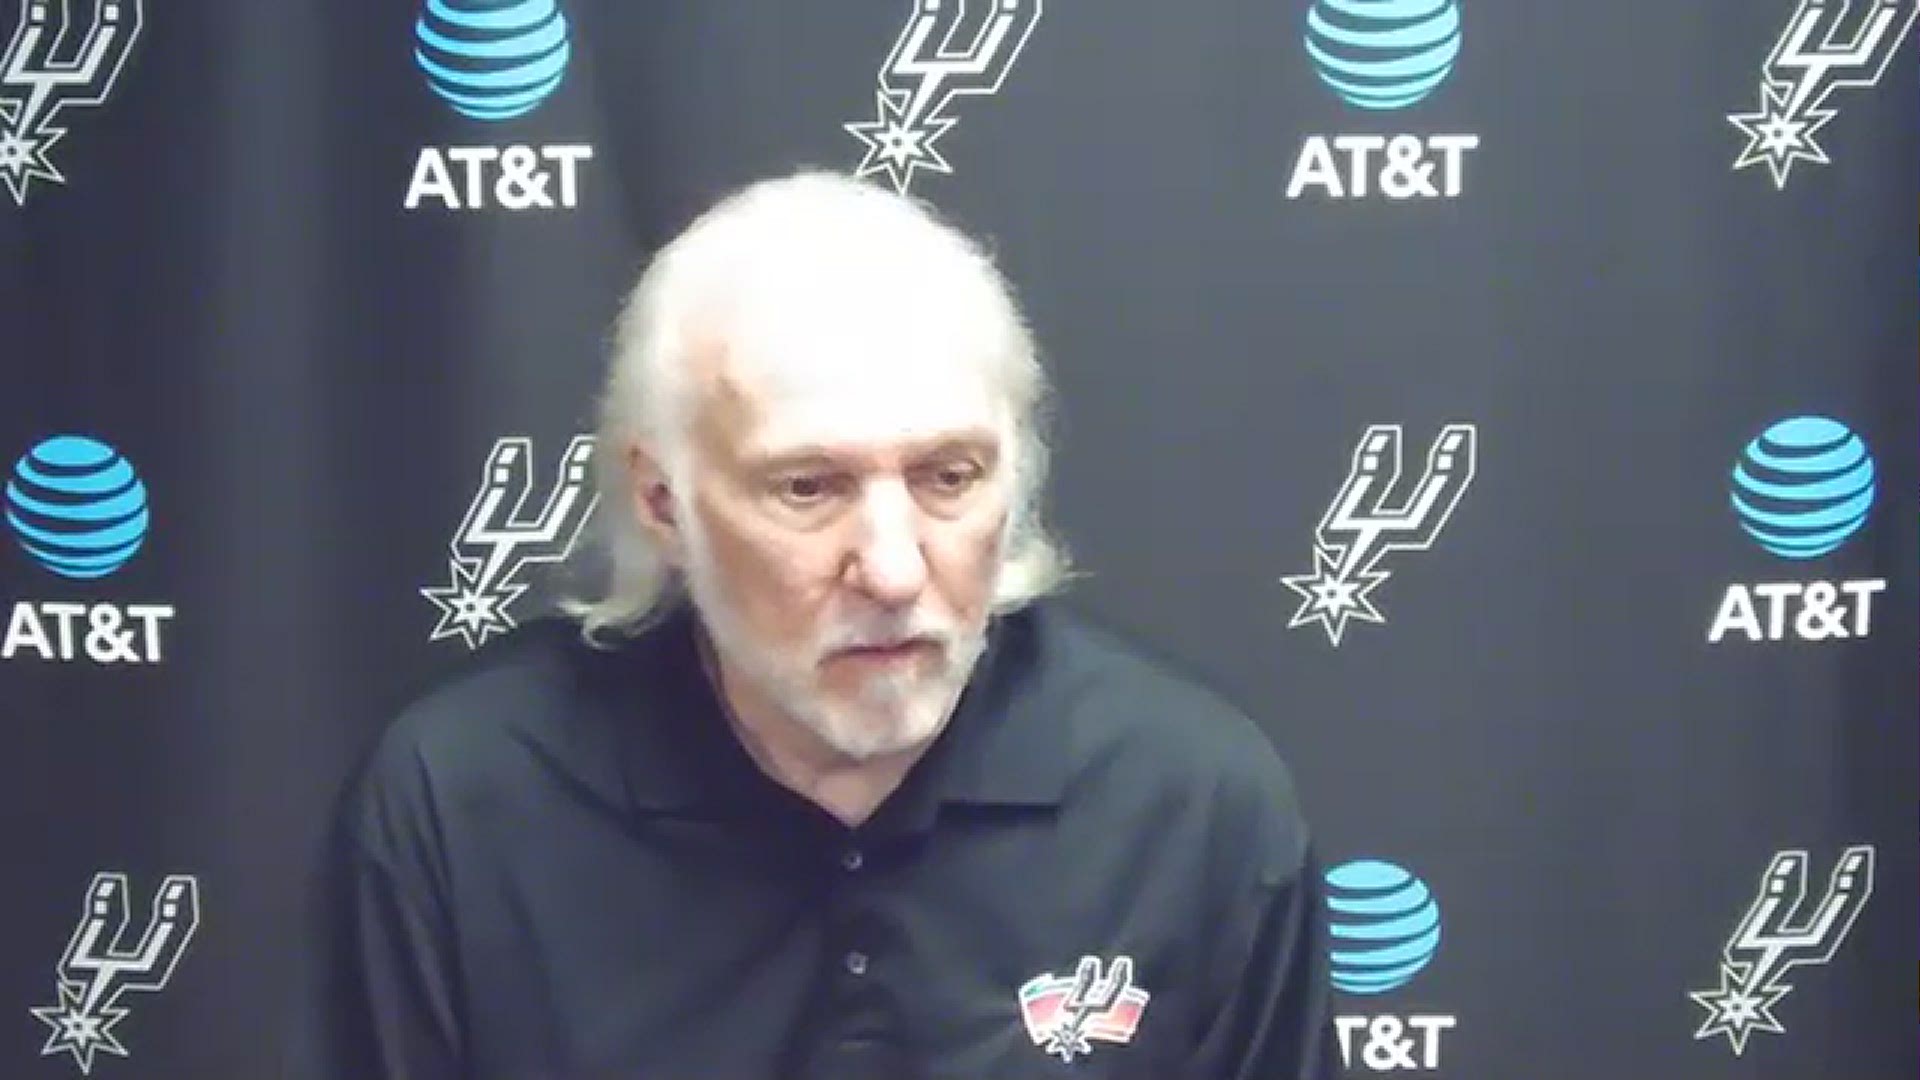 Pop spoke about his team's resilience and performance on short rest, and what he got from Lonnie Walker IV and Drew Eubanks off the bench.